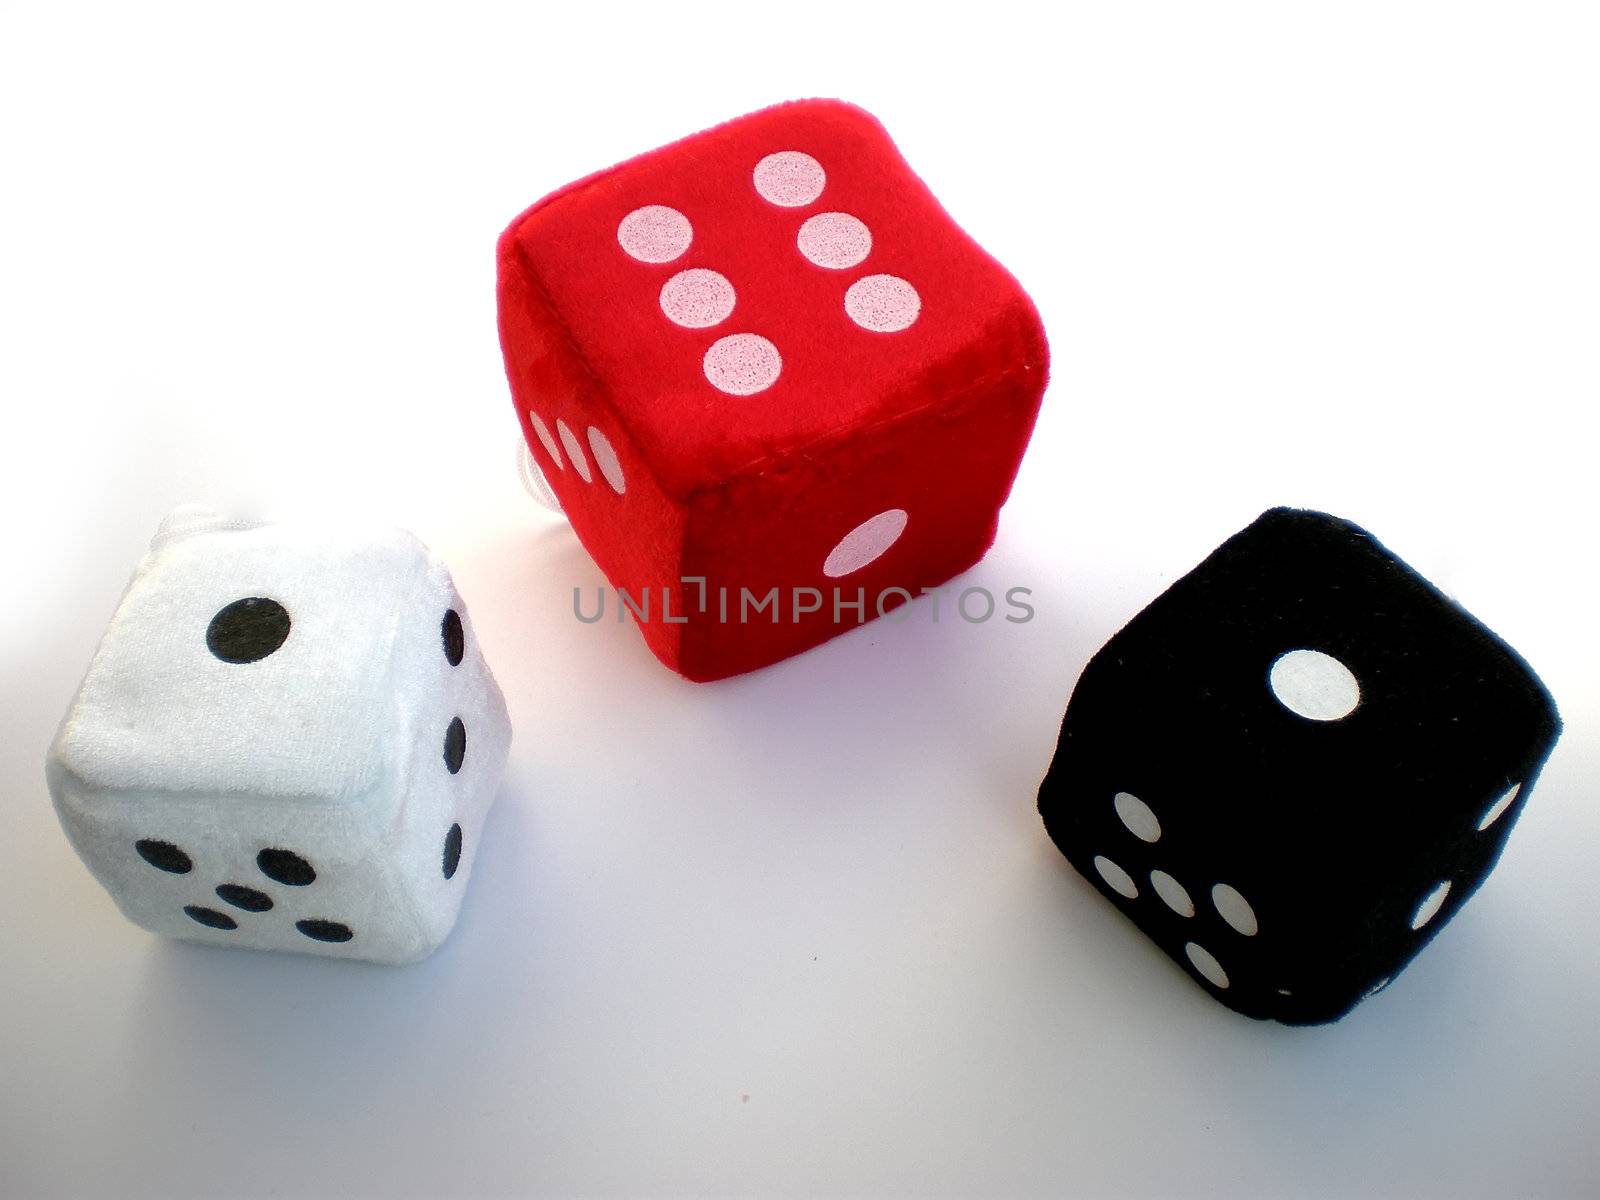 red, black and white dice isolated on white background